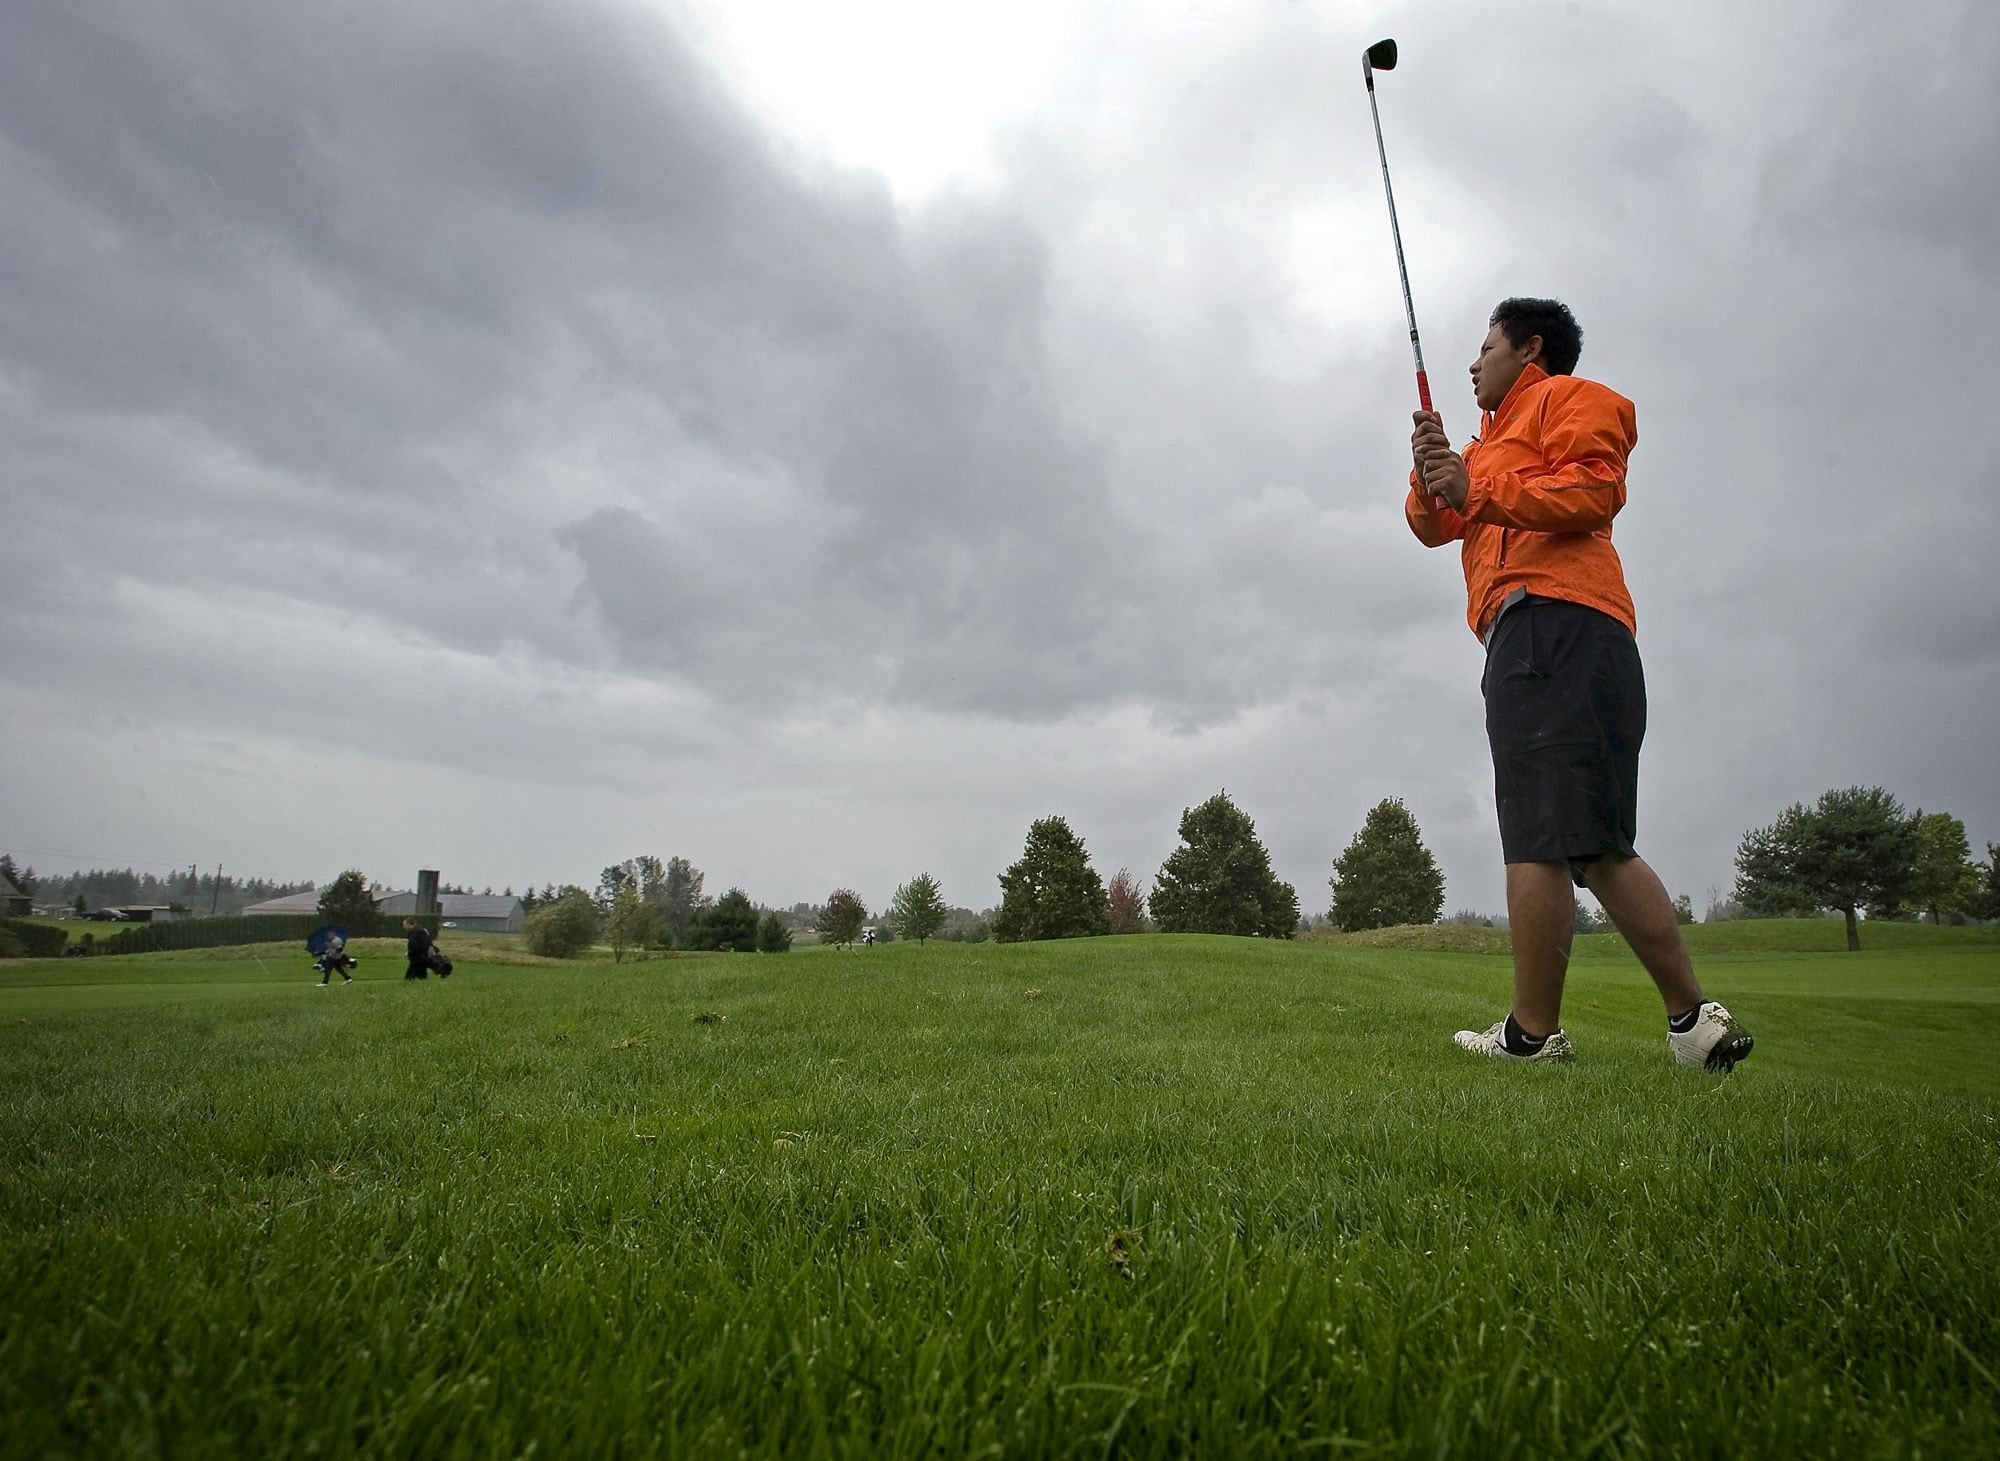 Heritage's Nick Regalado didn't let Tuesday's threatening skies keep him from wearing shorts at the Class 4A district golf tournament at Tri-Mountain Golf Course in Ridgefield.